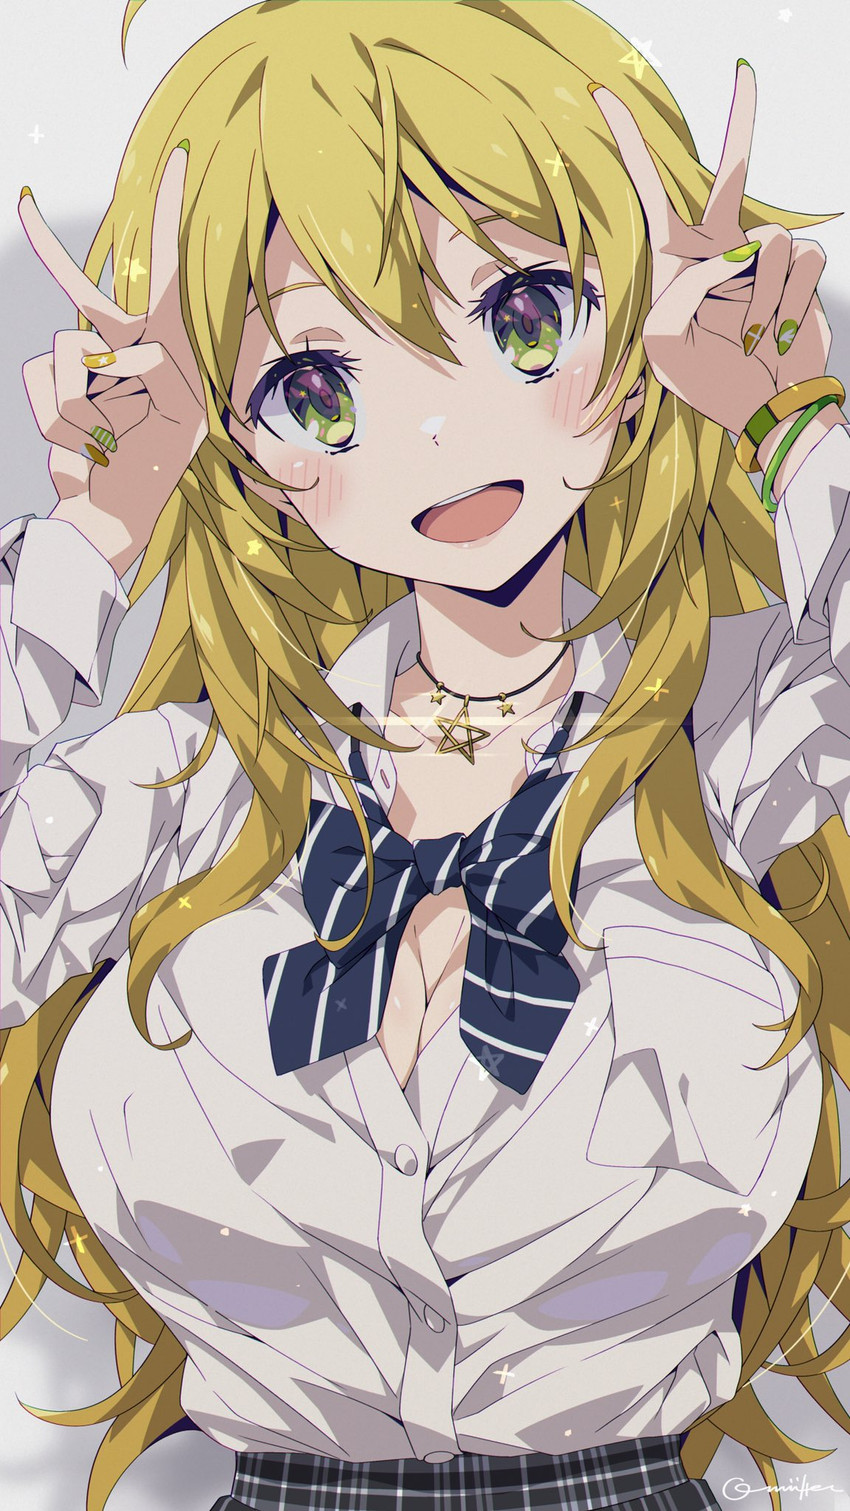 __hoshii_miki_idolmaster_and_1_more_drawn_by_oomura_karasu__sample-c8d12e0f5068da3b27c1aa460a7b6e7a.jpg